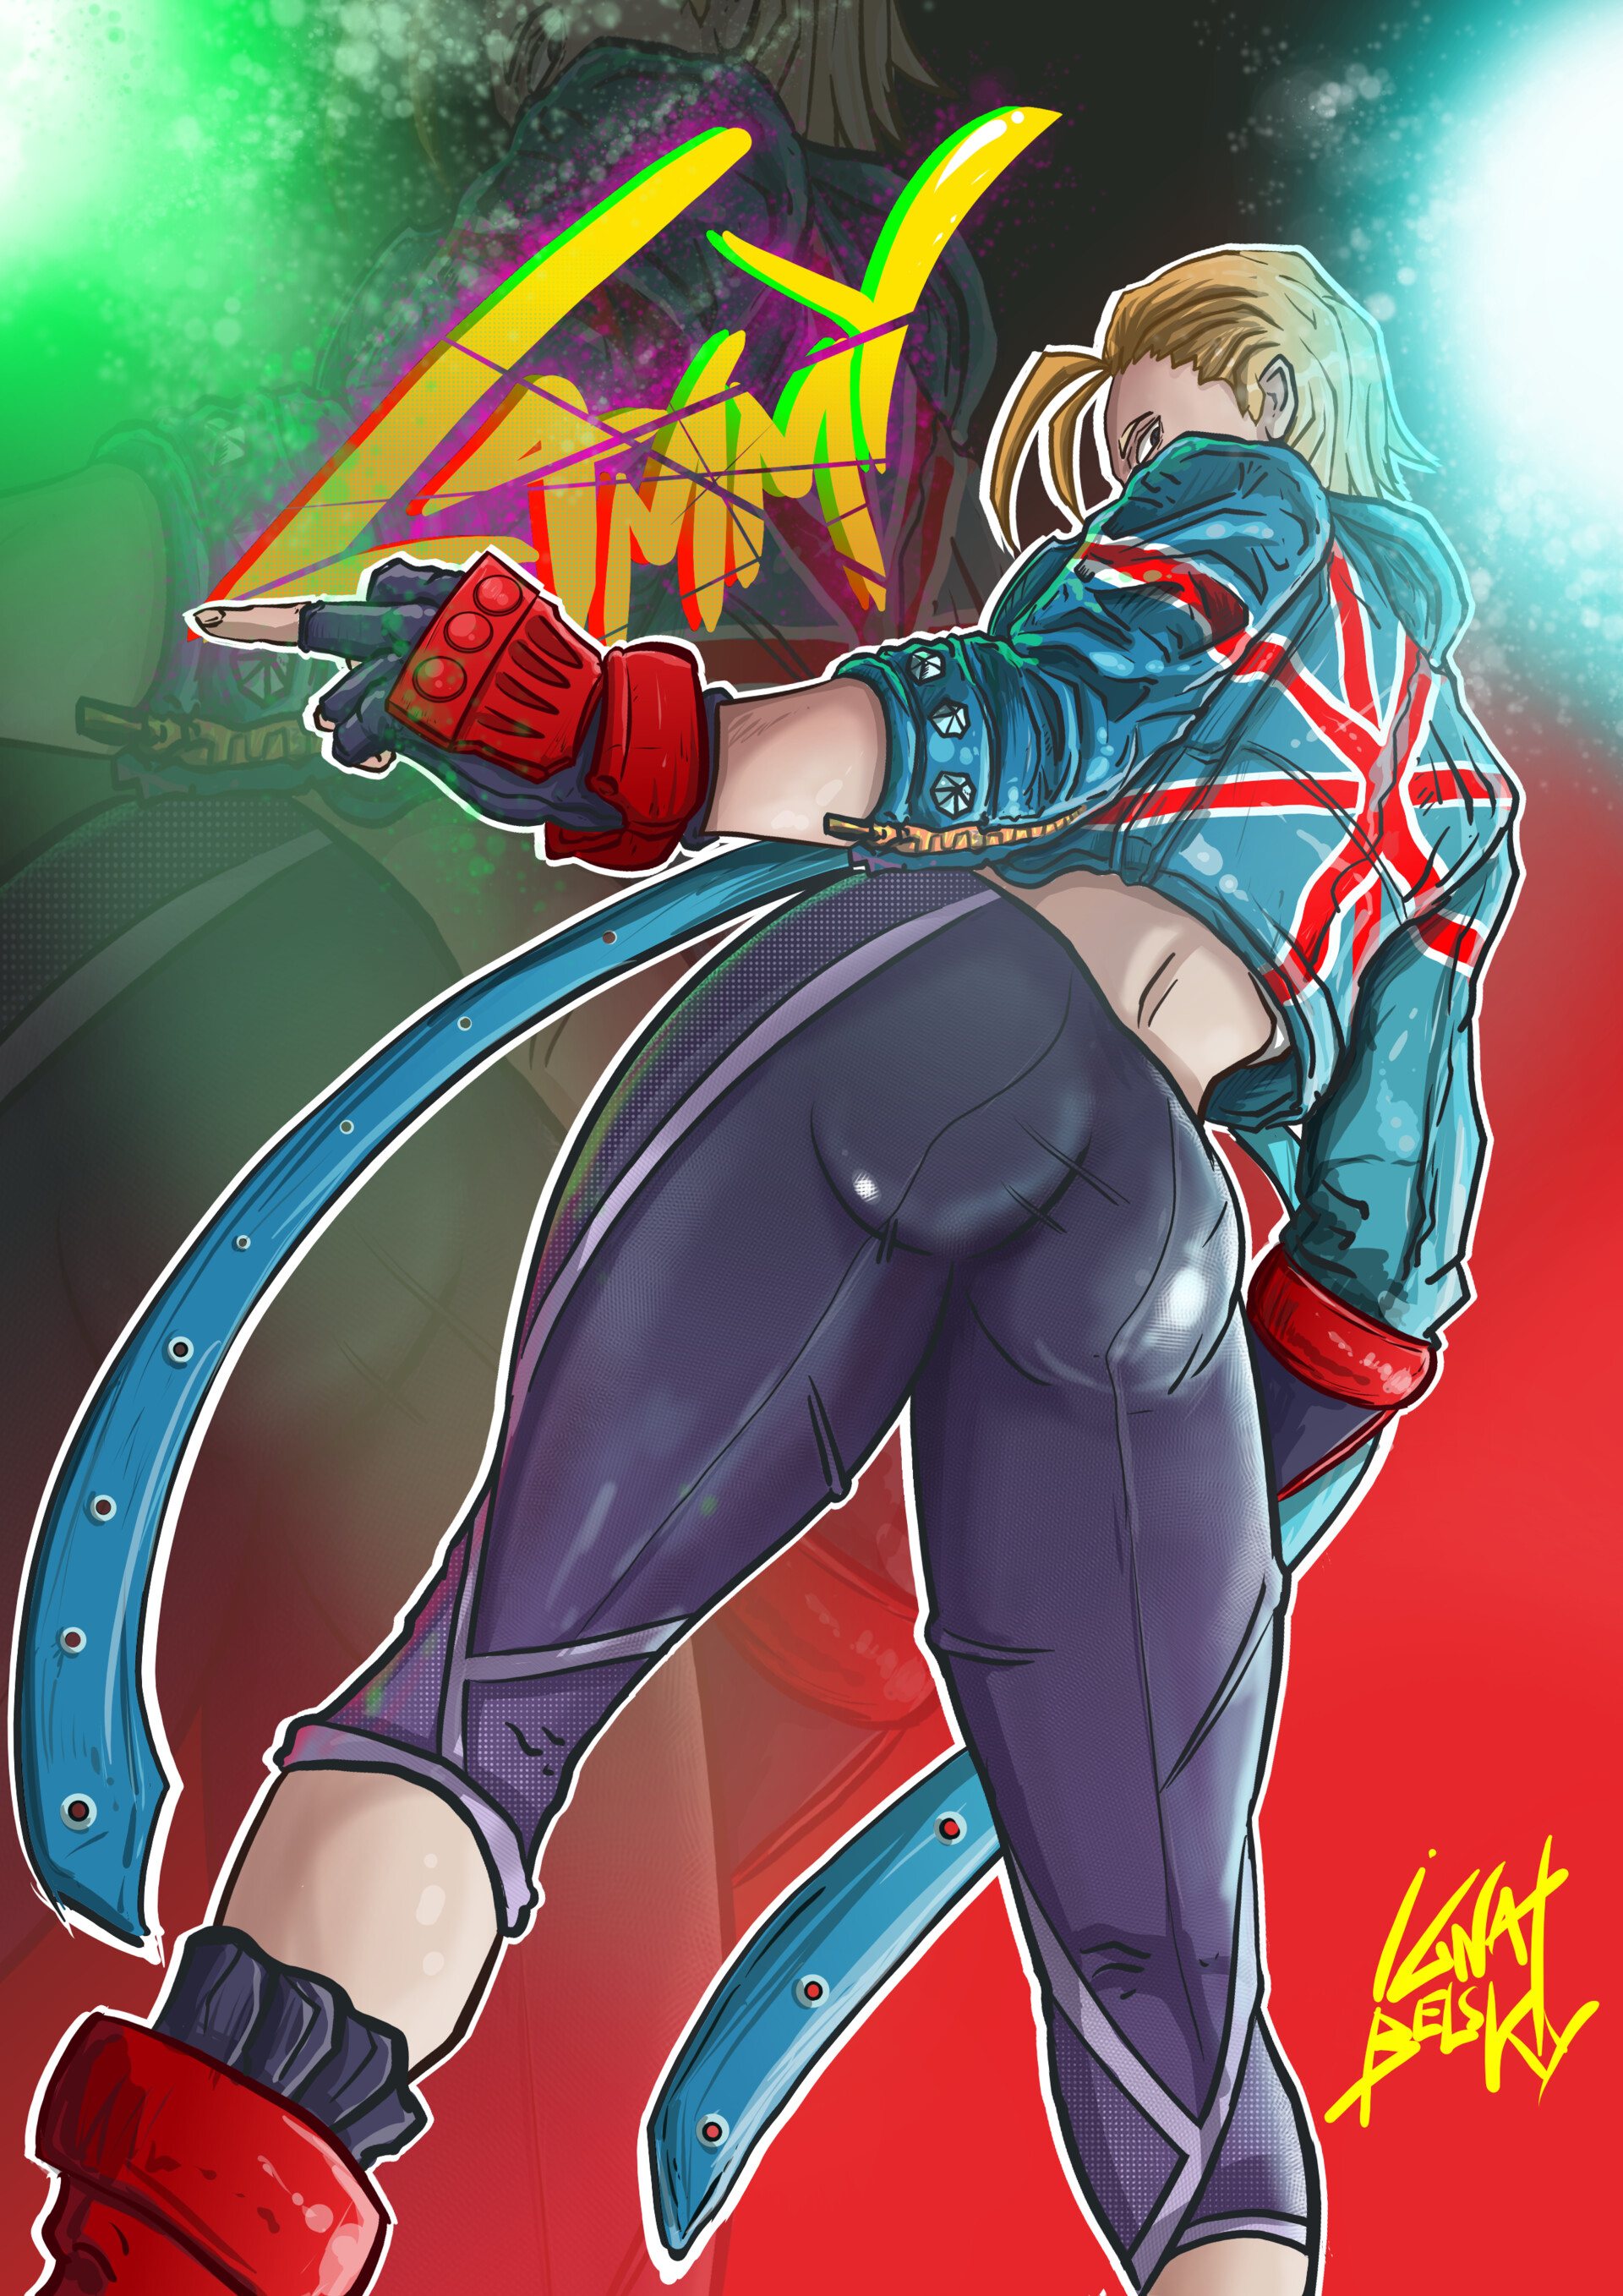 Who is Cammy in Street Fighter 6?